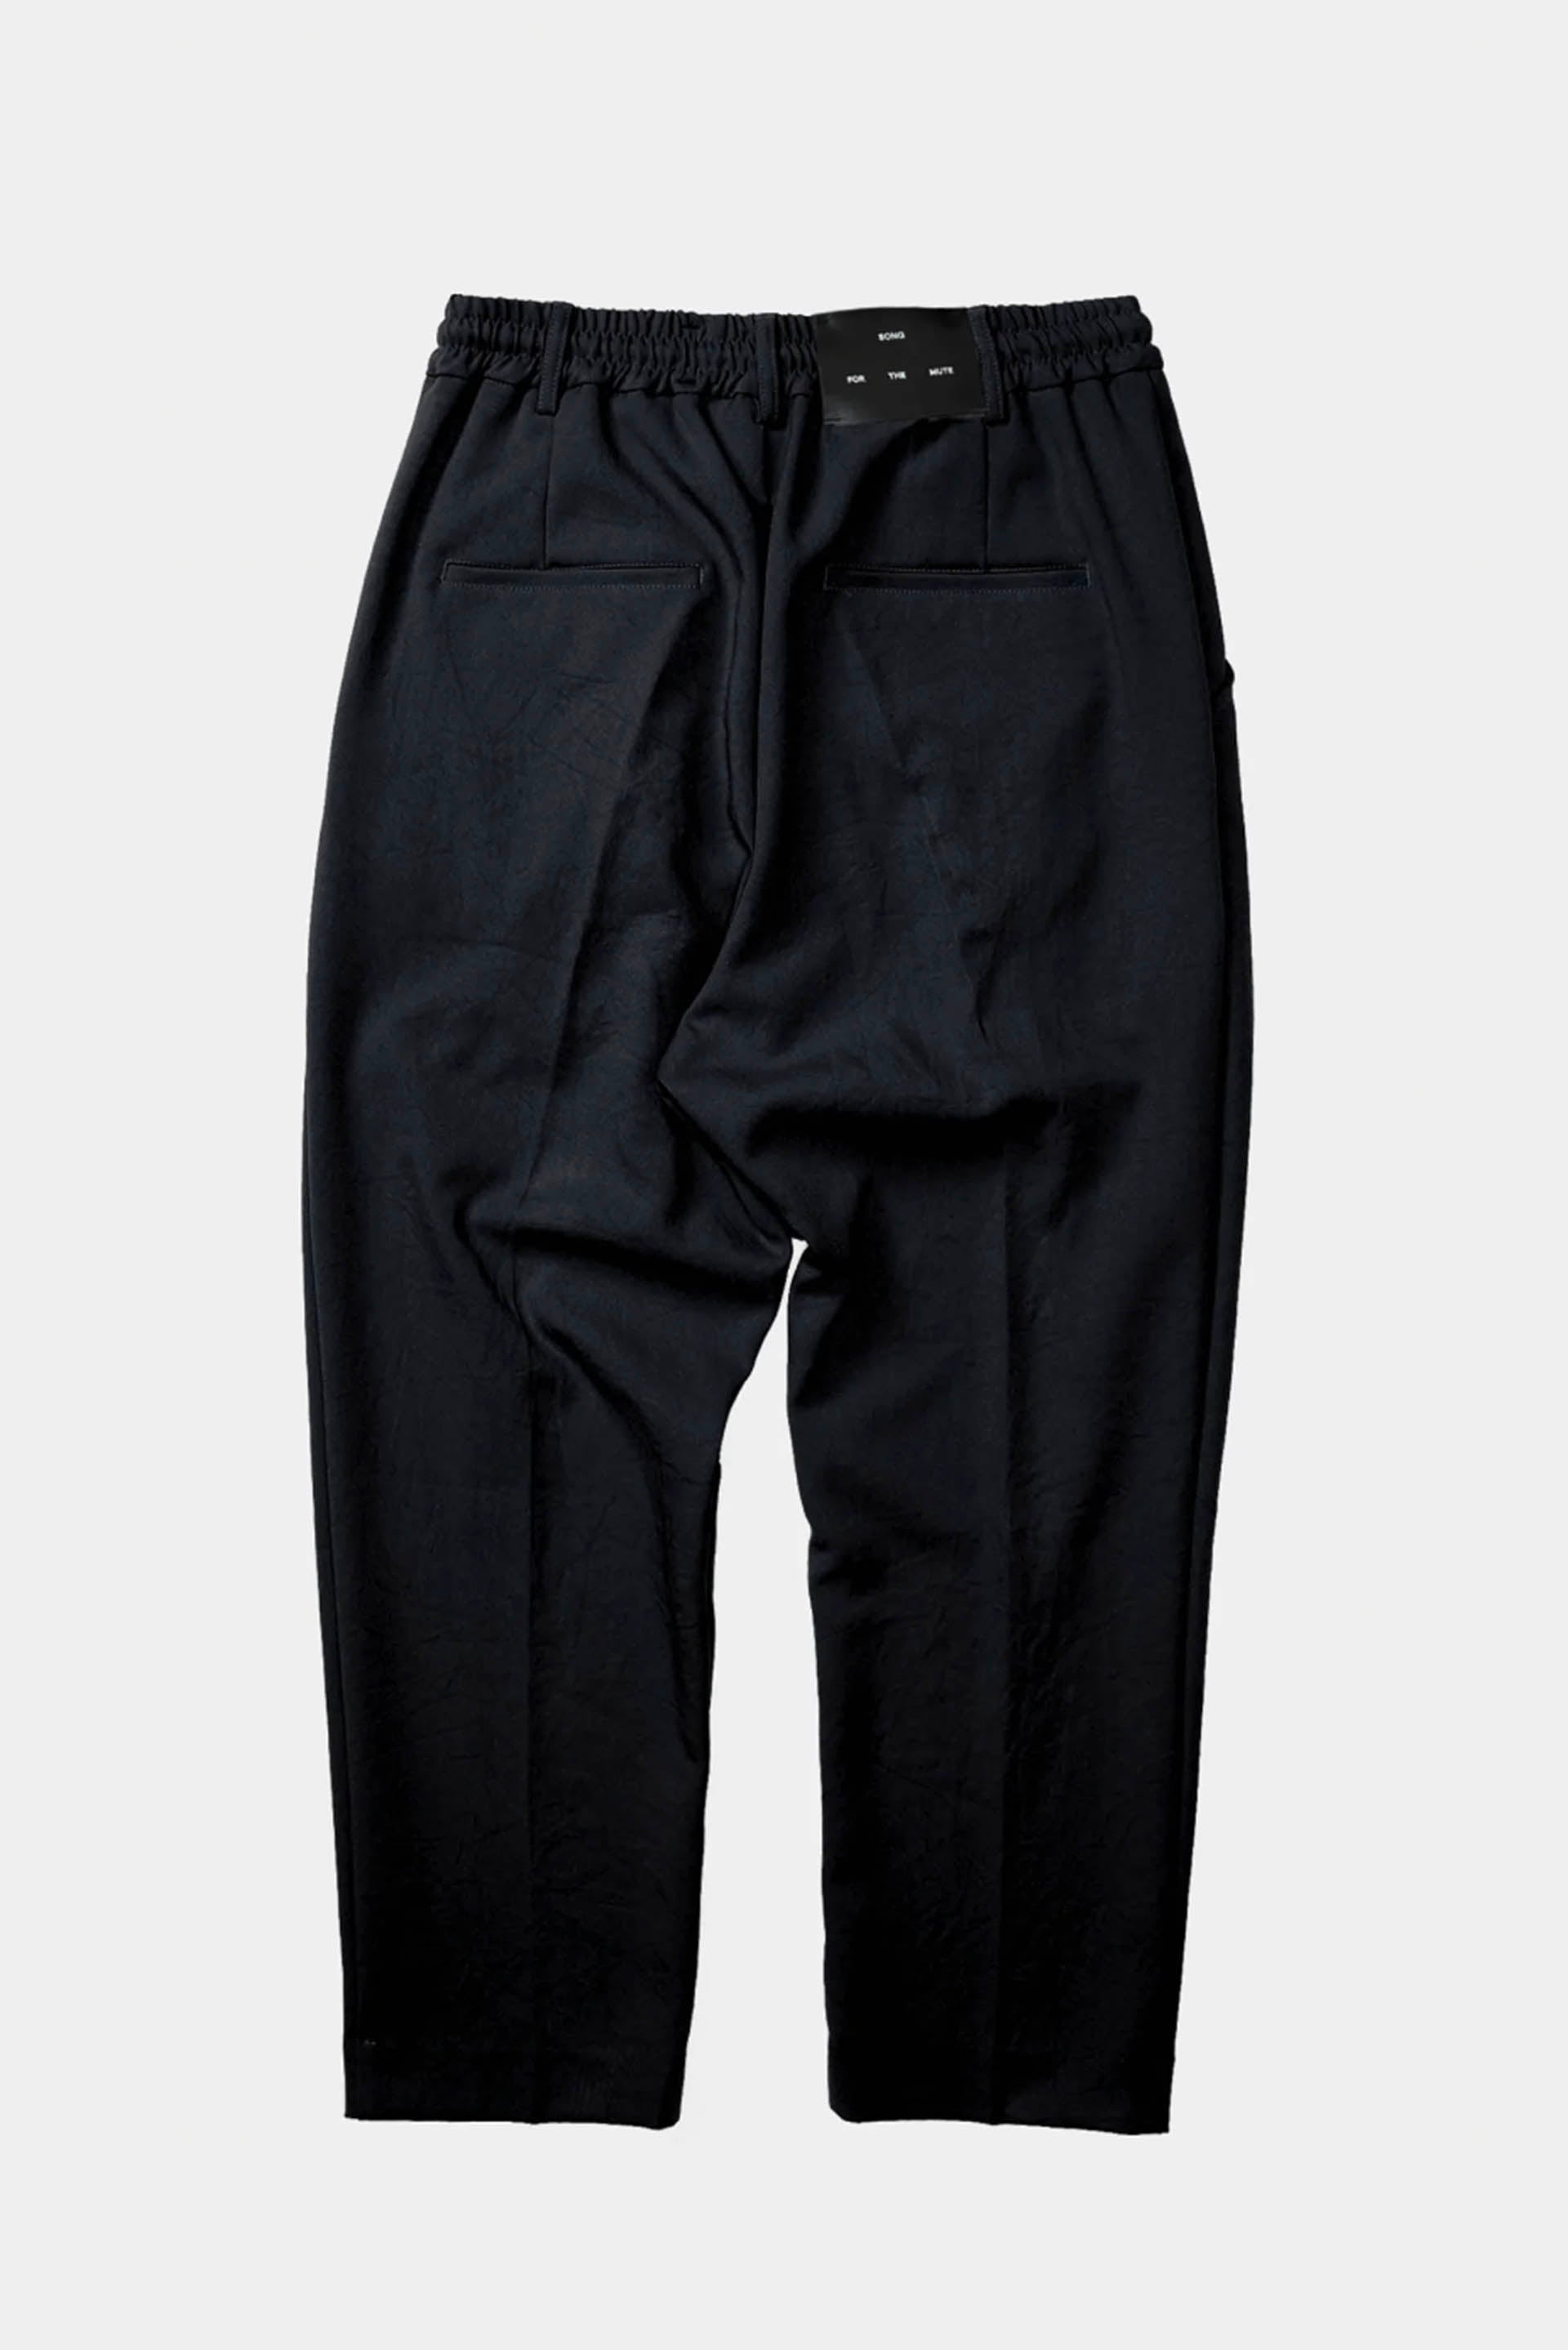 Buy SONG FOR THE MUTE Cargo Trousers & Pants | FASHIOLA INDIA